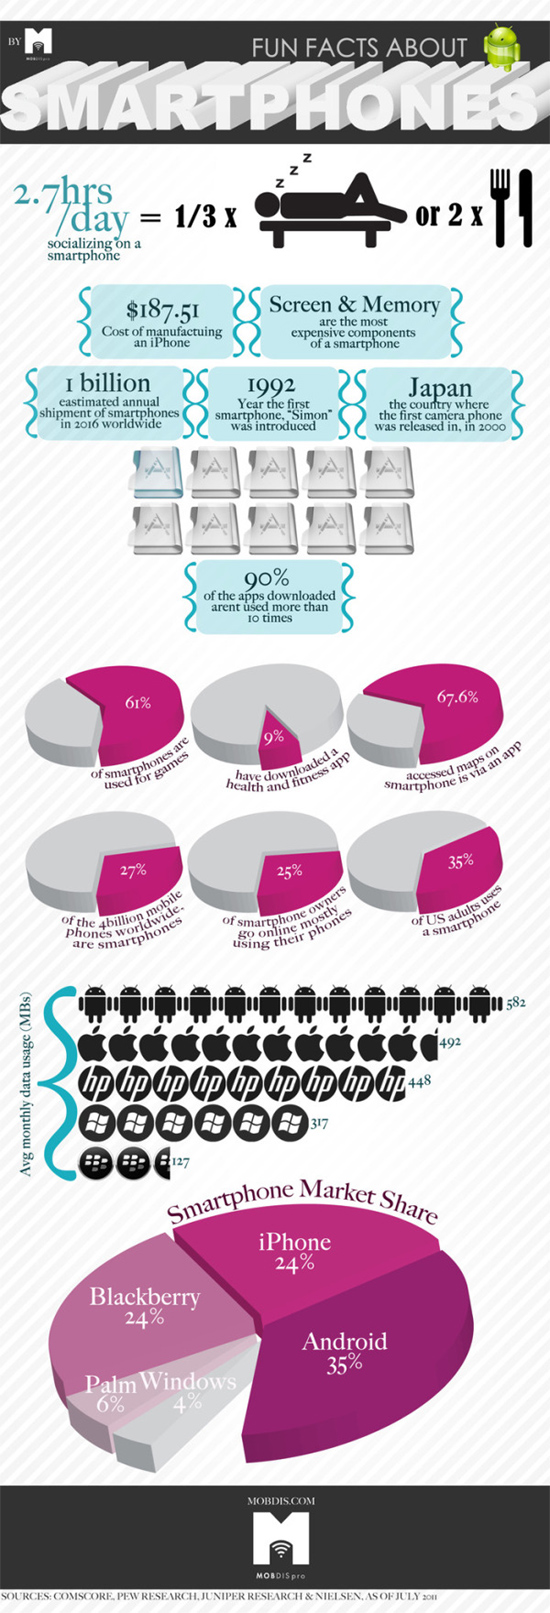 Fun Facts About Smartphones (Infographic) 2